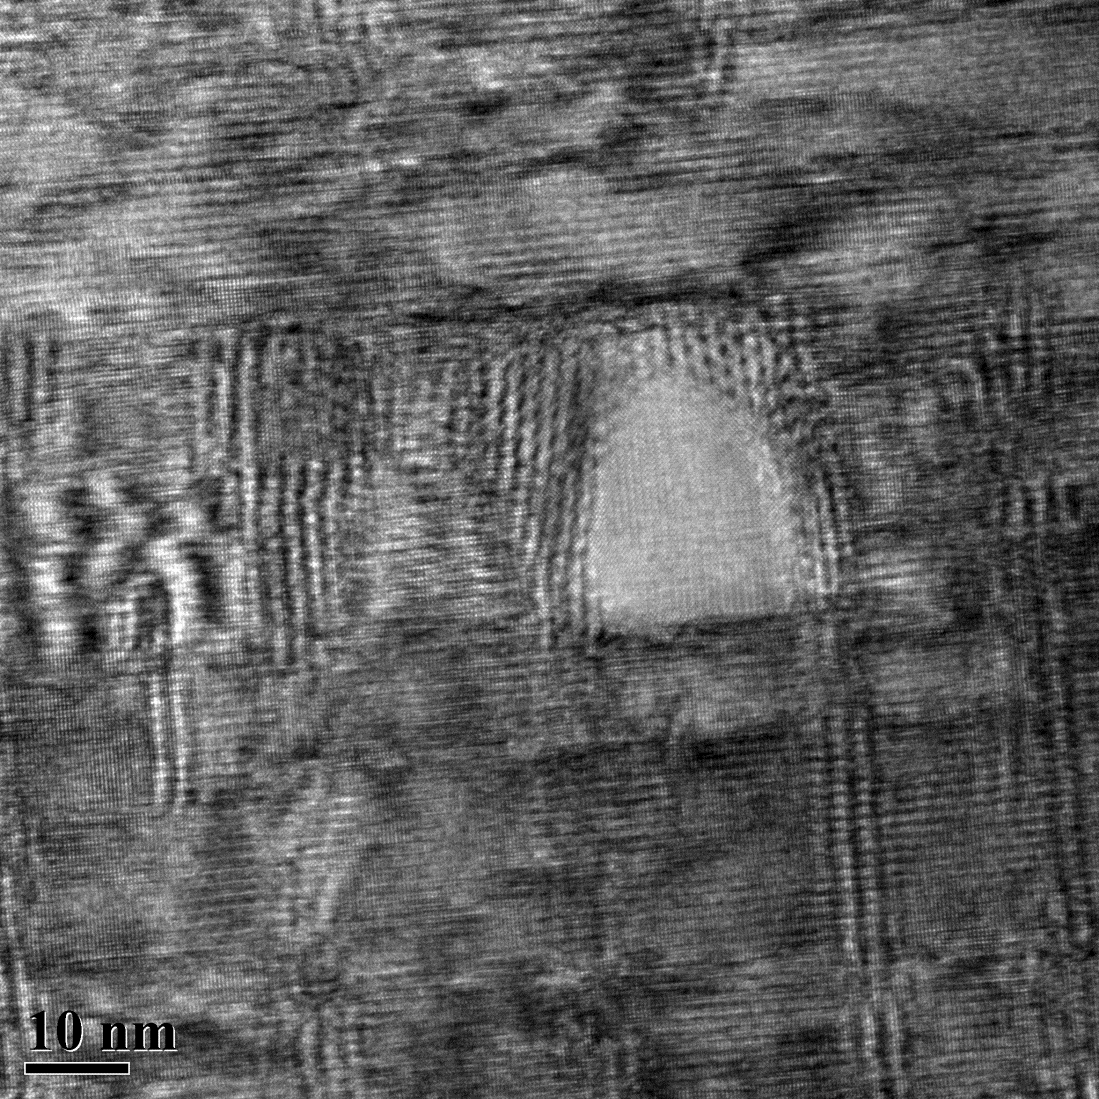 Fig. 1b. cross sectional TEM image showing complex defect microstructure in YBCO film with Ta and Nb-based double perovskite pinning additions. These unique pinning centres enable high field properties to be achieved. TEM image is courtesy of Wang TEM gro